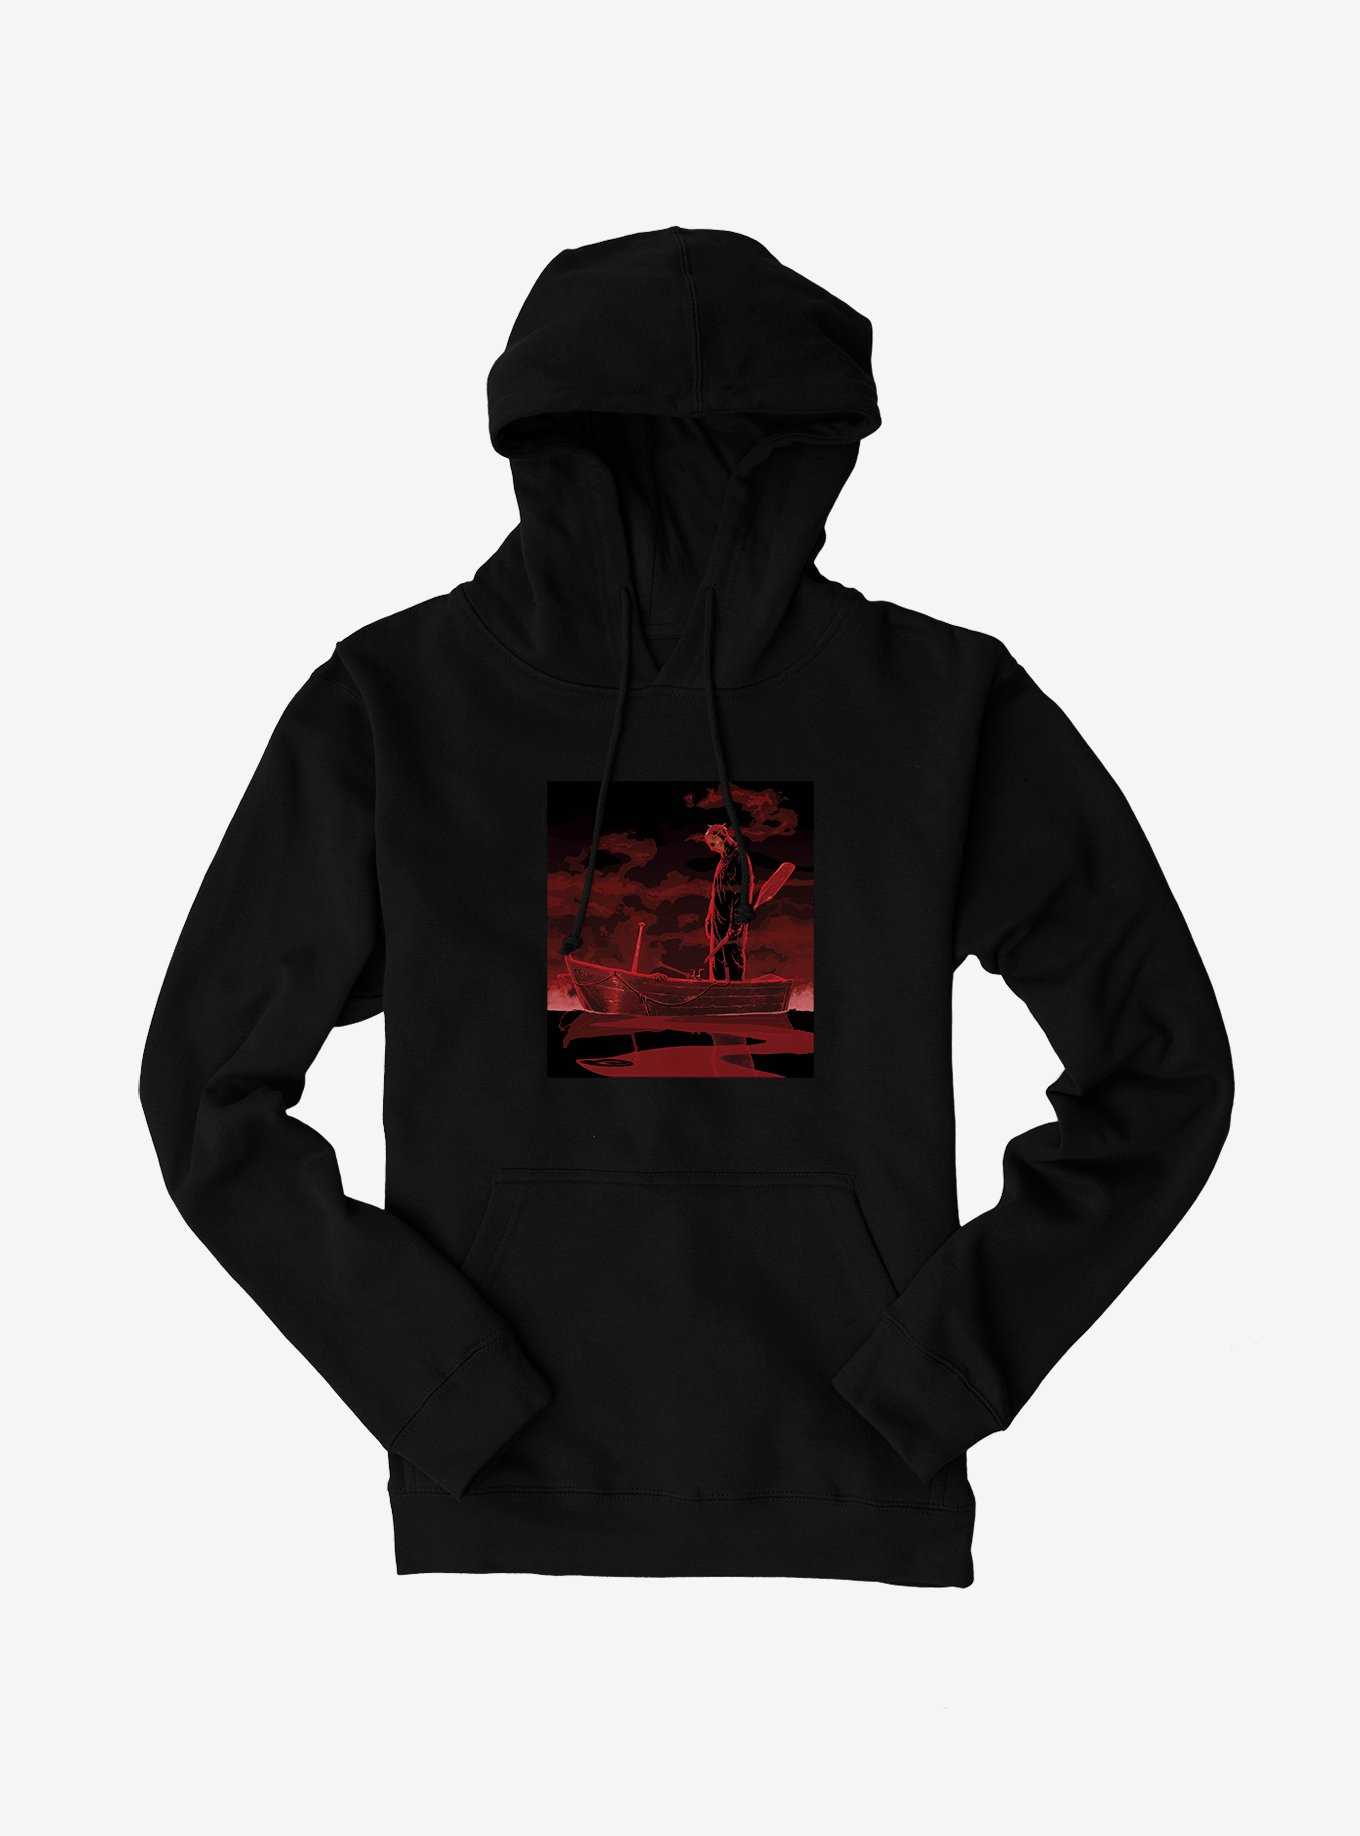 Friday The 13th Jason Boat Hoodie, , hi-res